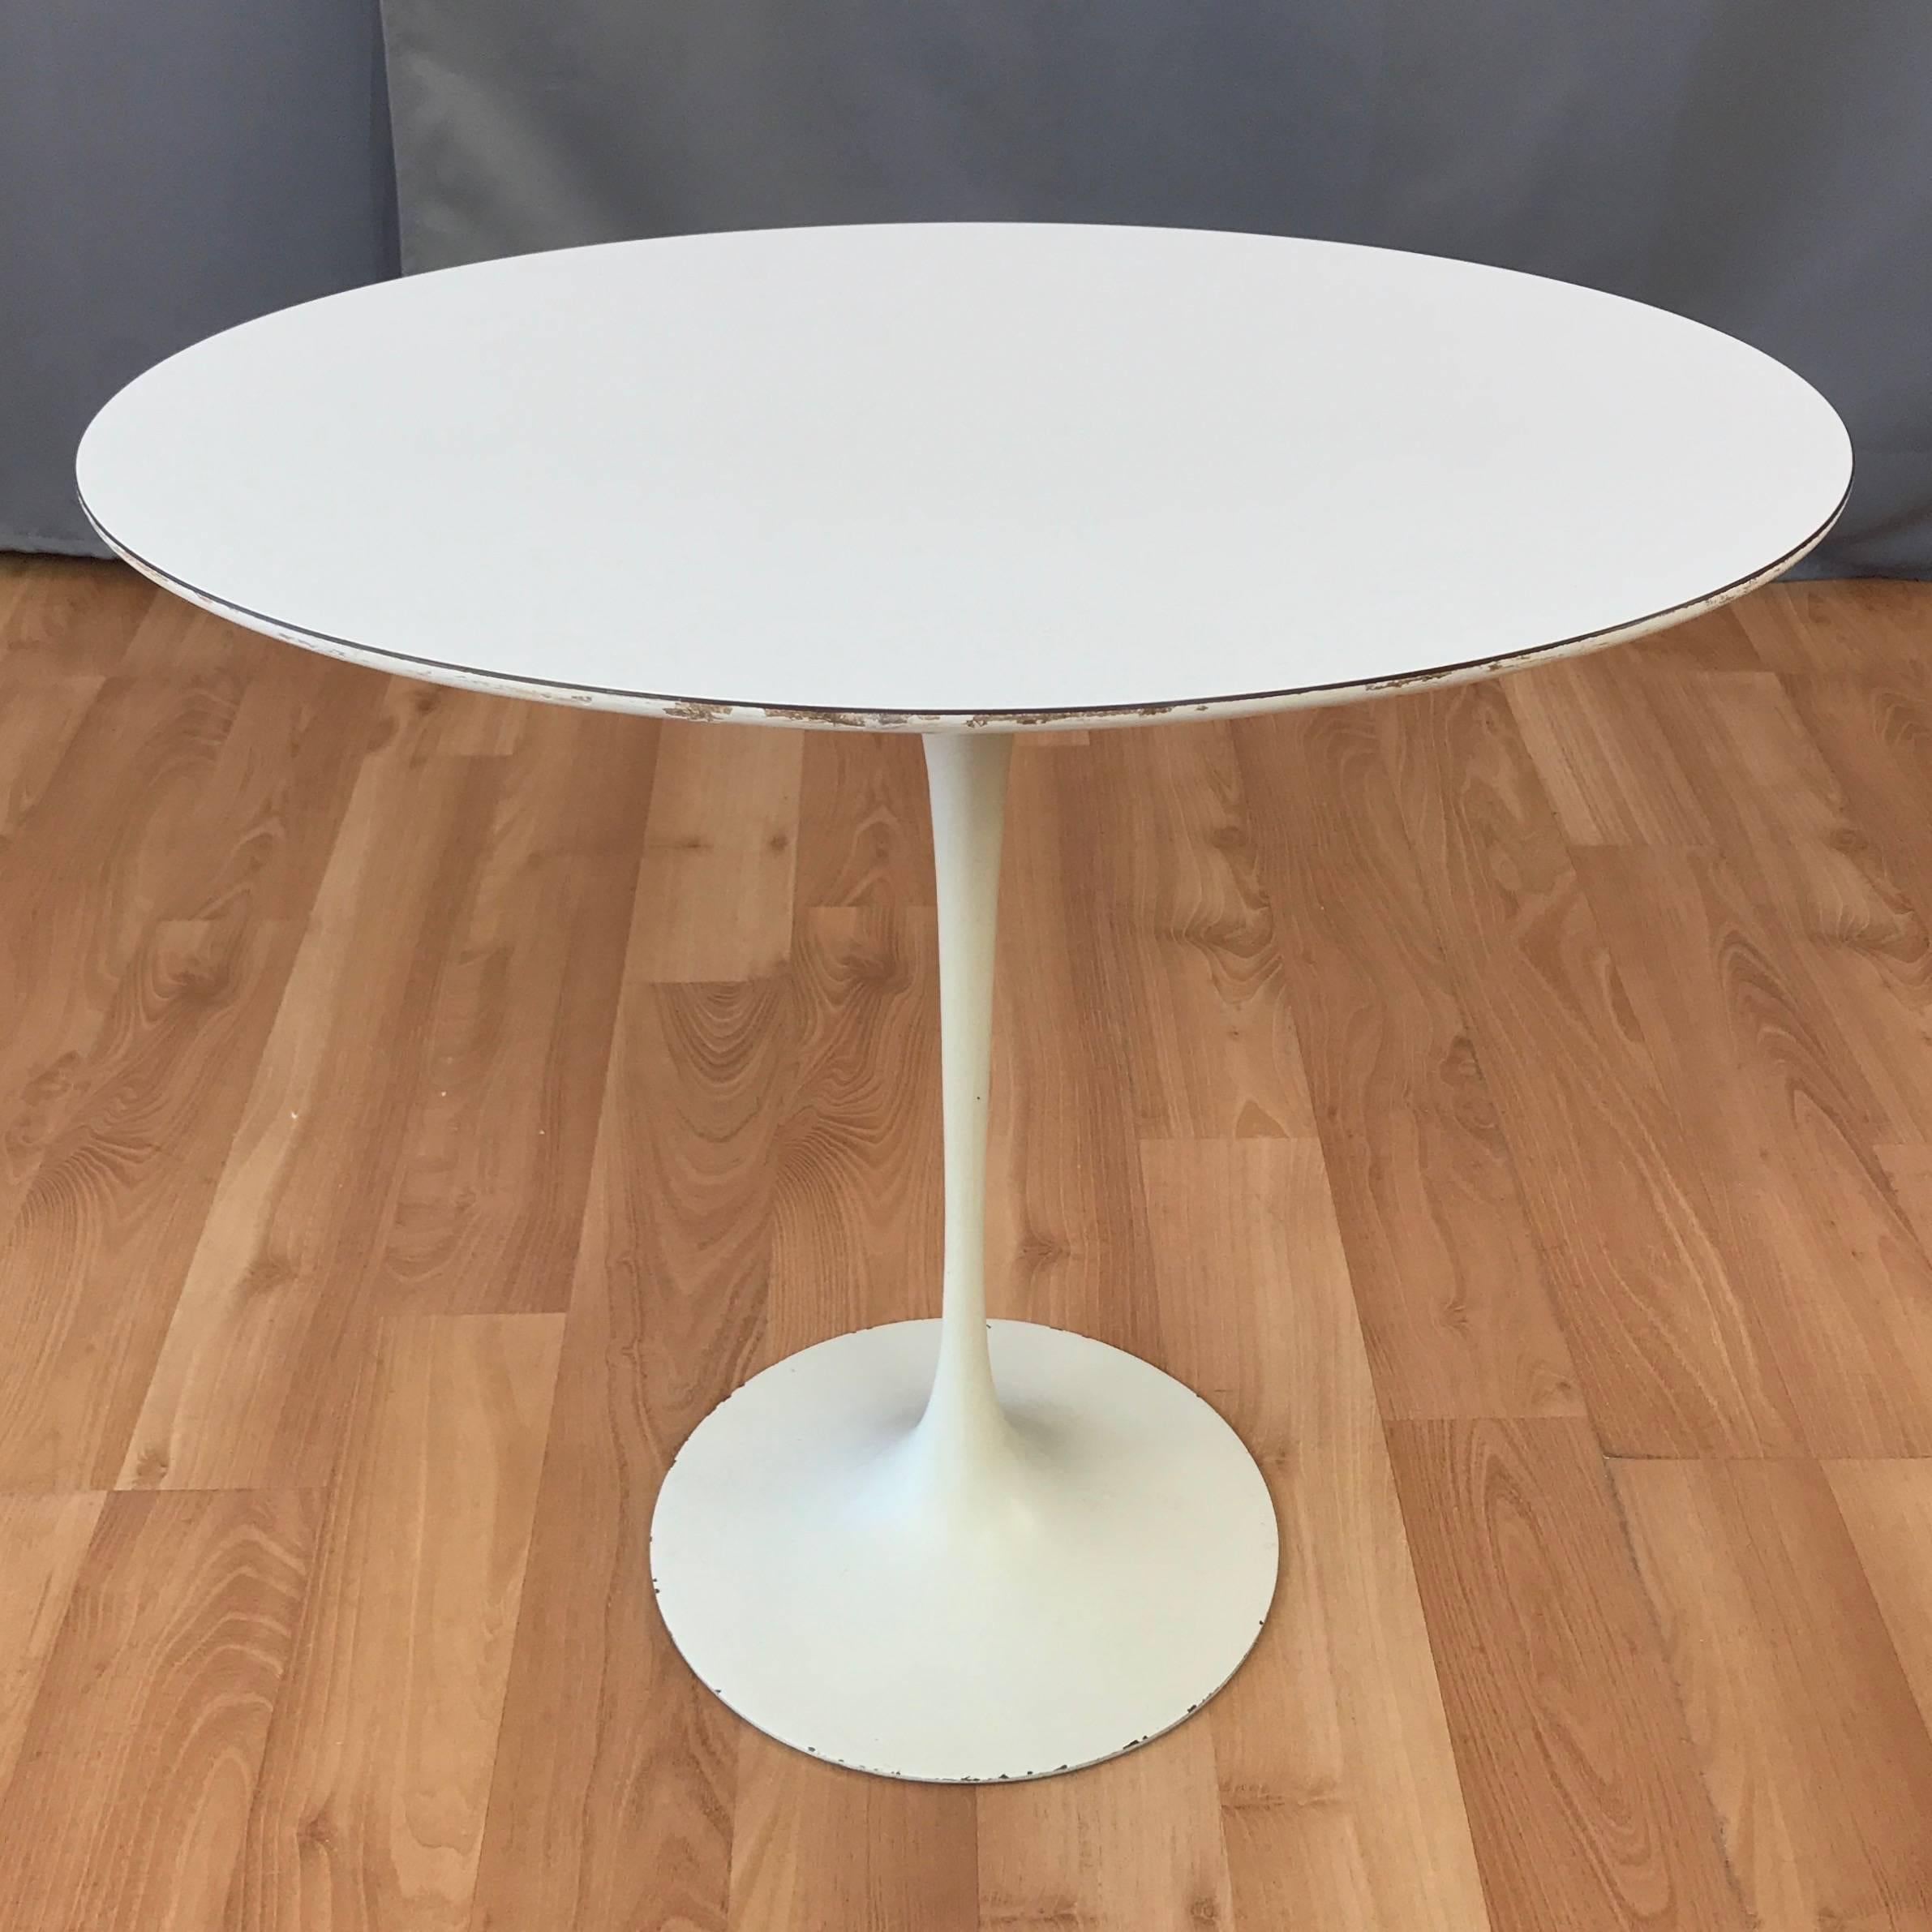 An early Pedestal Collection oval side table with laminate top by Eero Saarinen for Knoll. 

Designed in 1957 and more commonly referred to as the Tulip table, this example of the Mid-Century Modern furniture icon dates from the late 1950s. Features